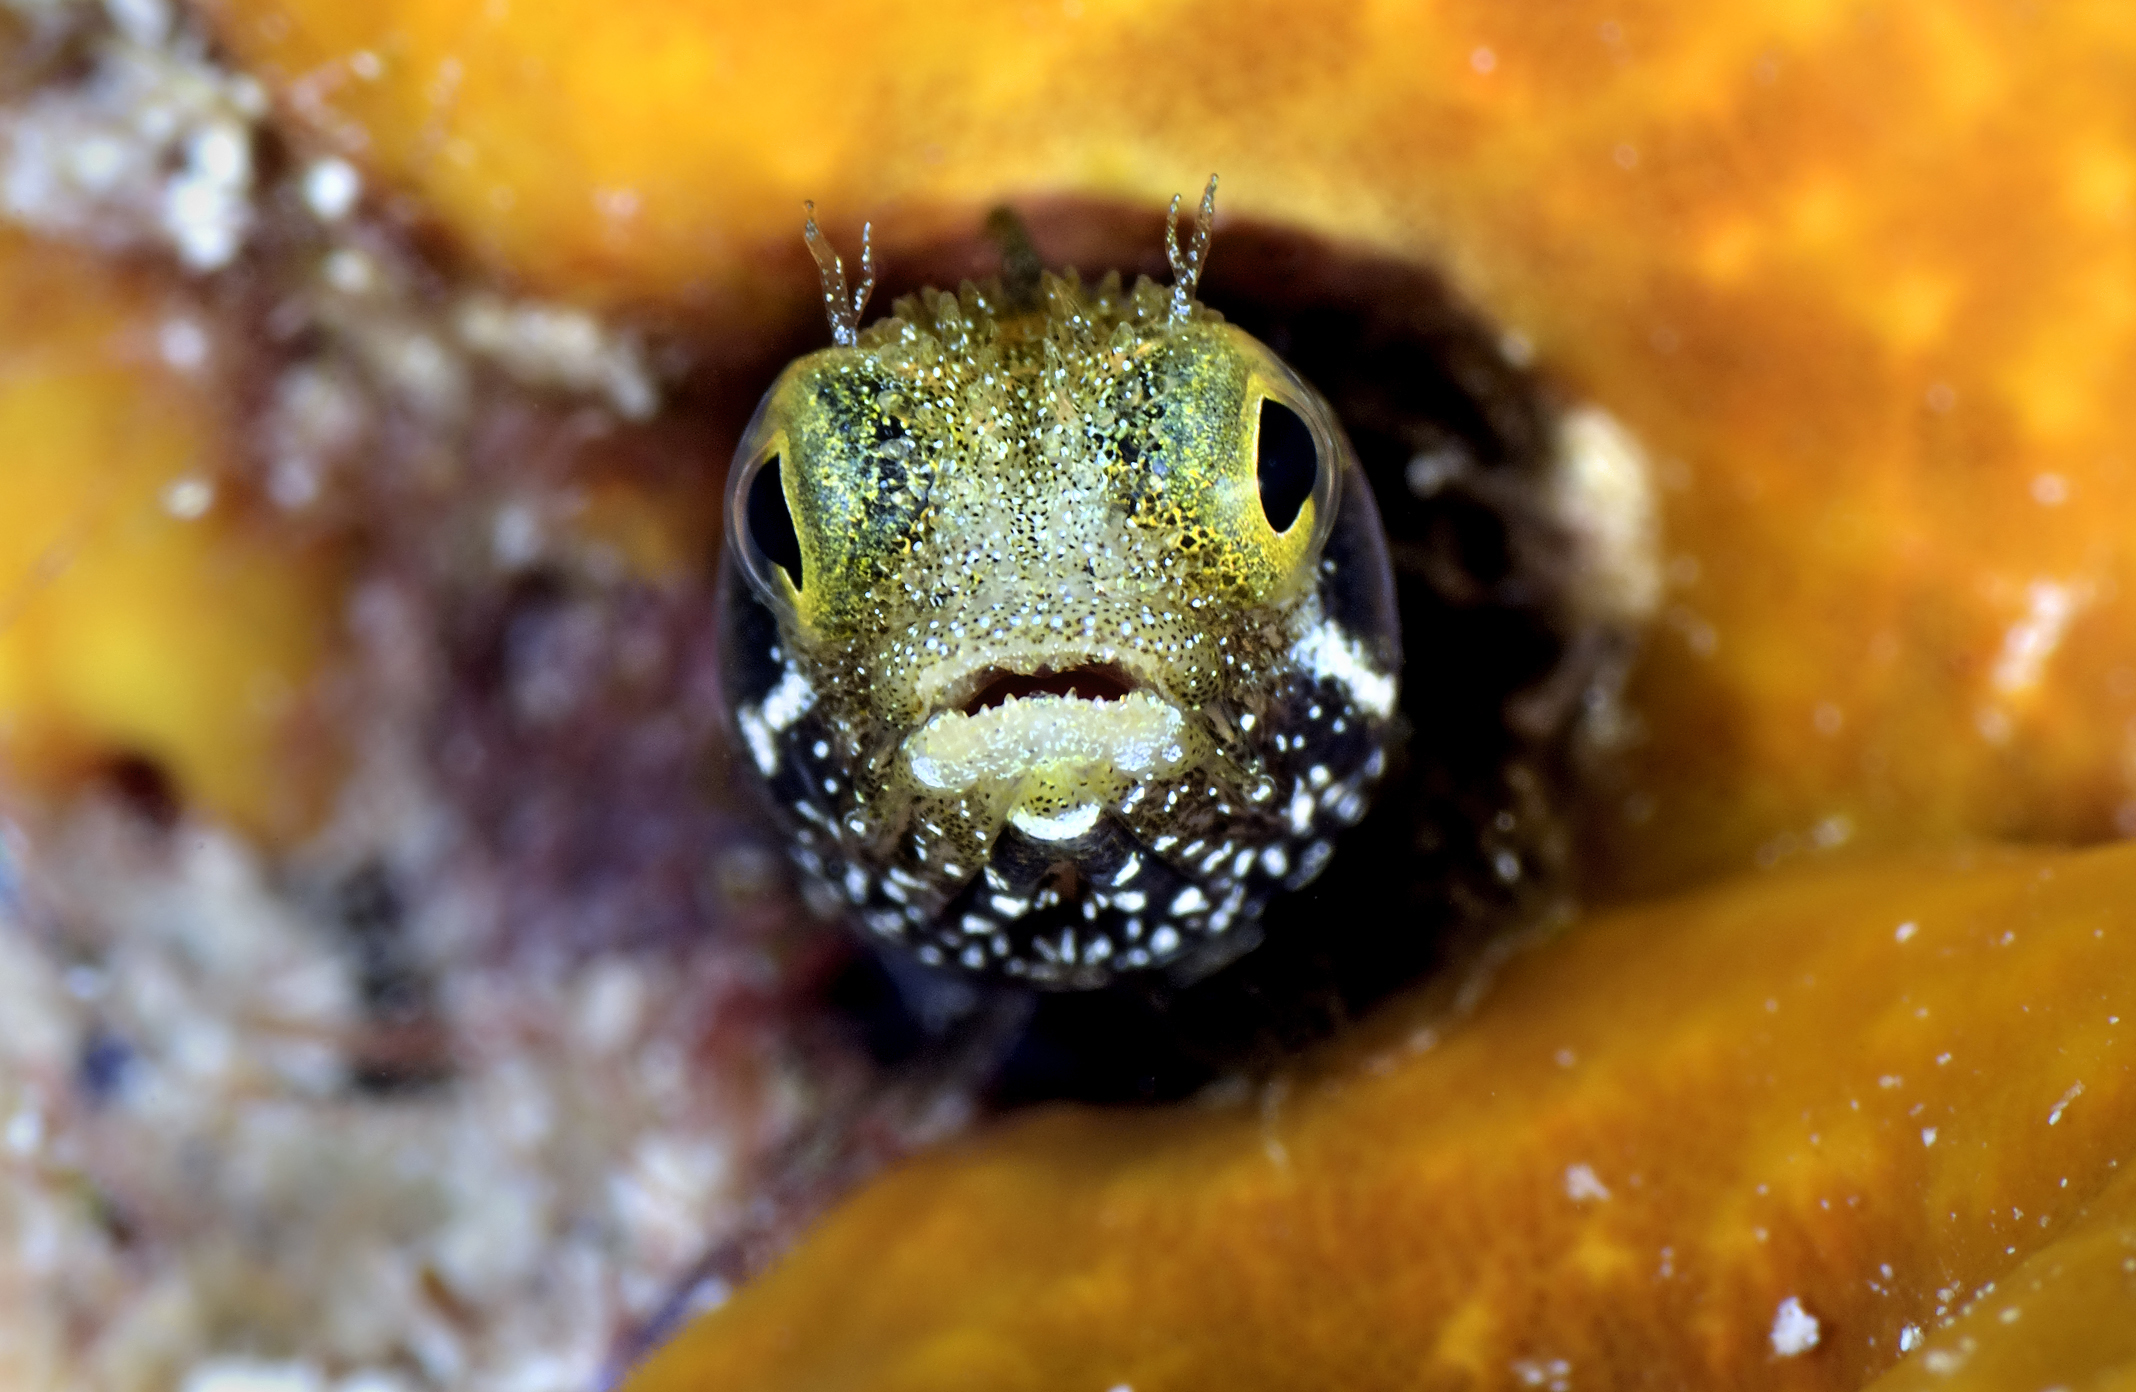 Spinyhead blenny, The Dome, Turks and Caicos. Photo by Scott Johnson